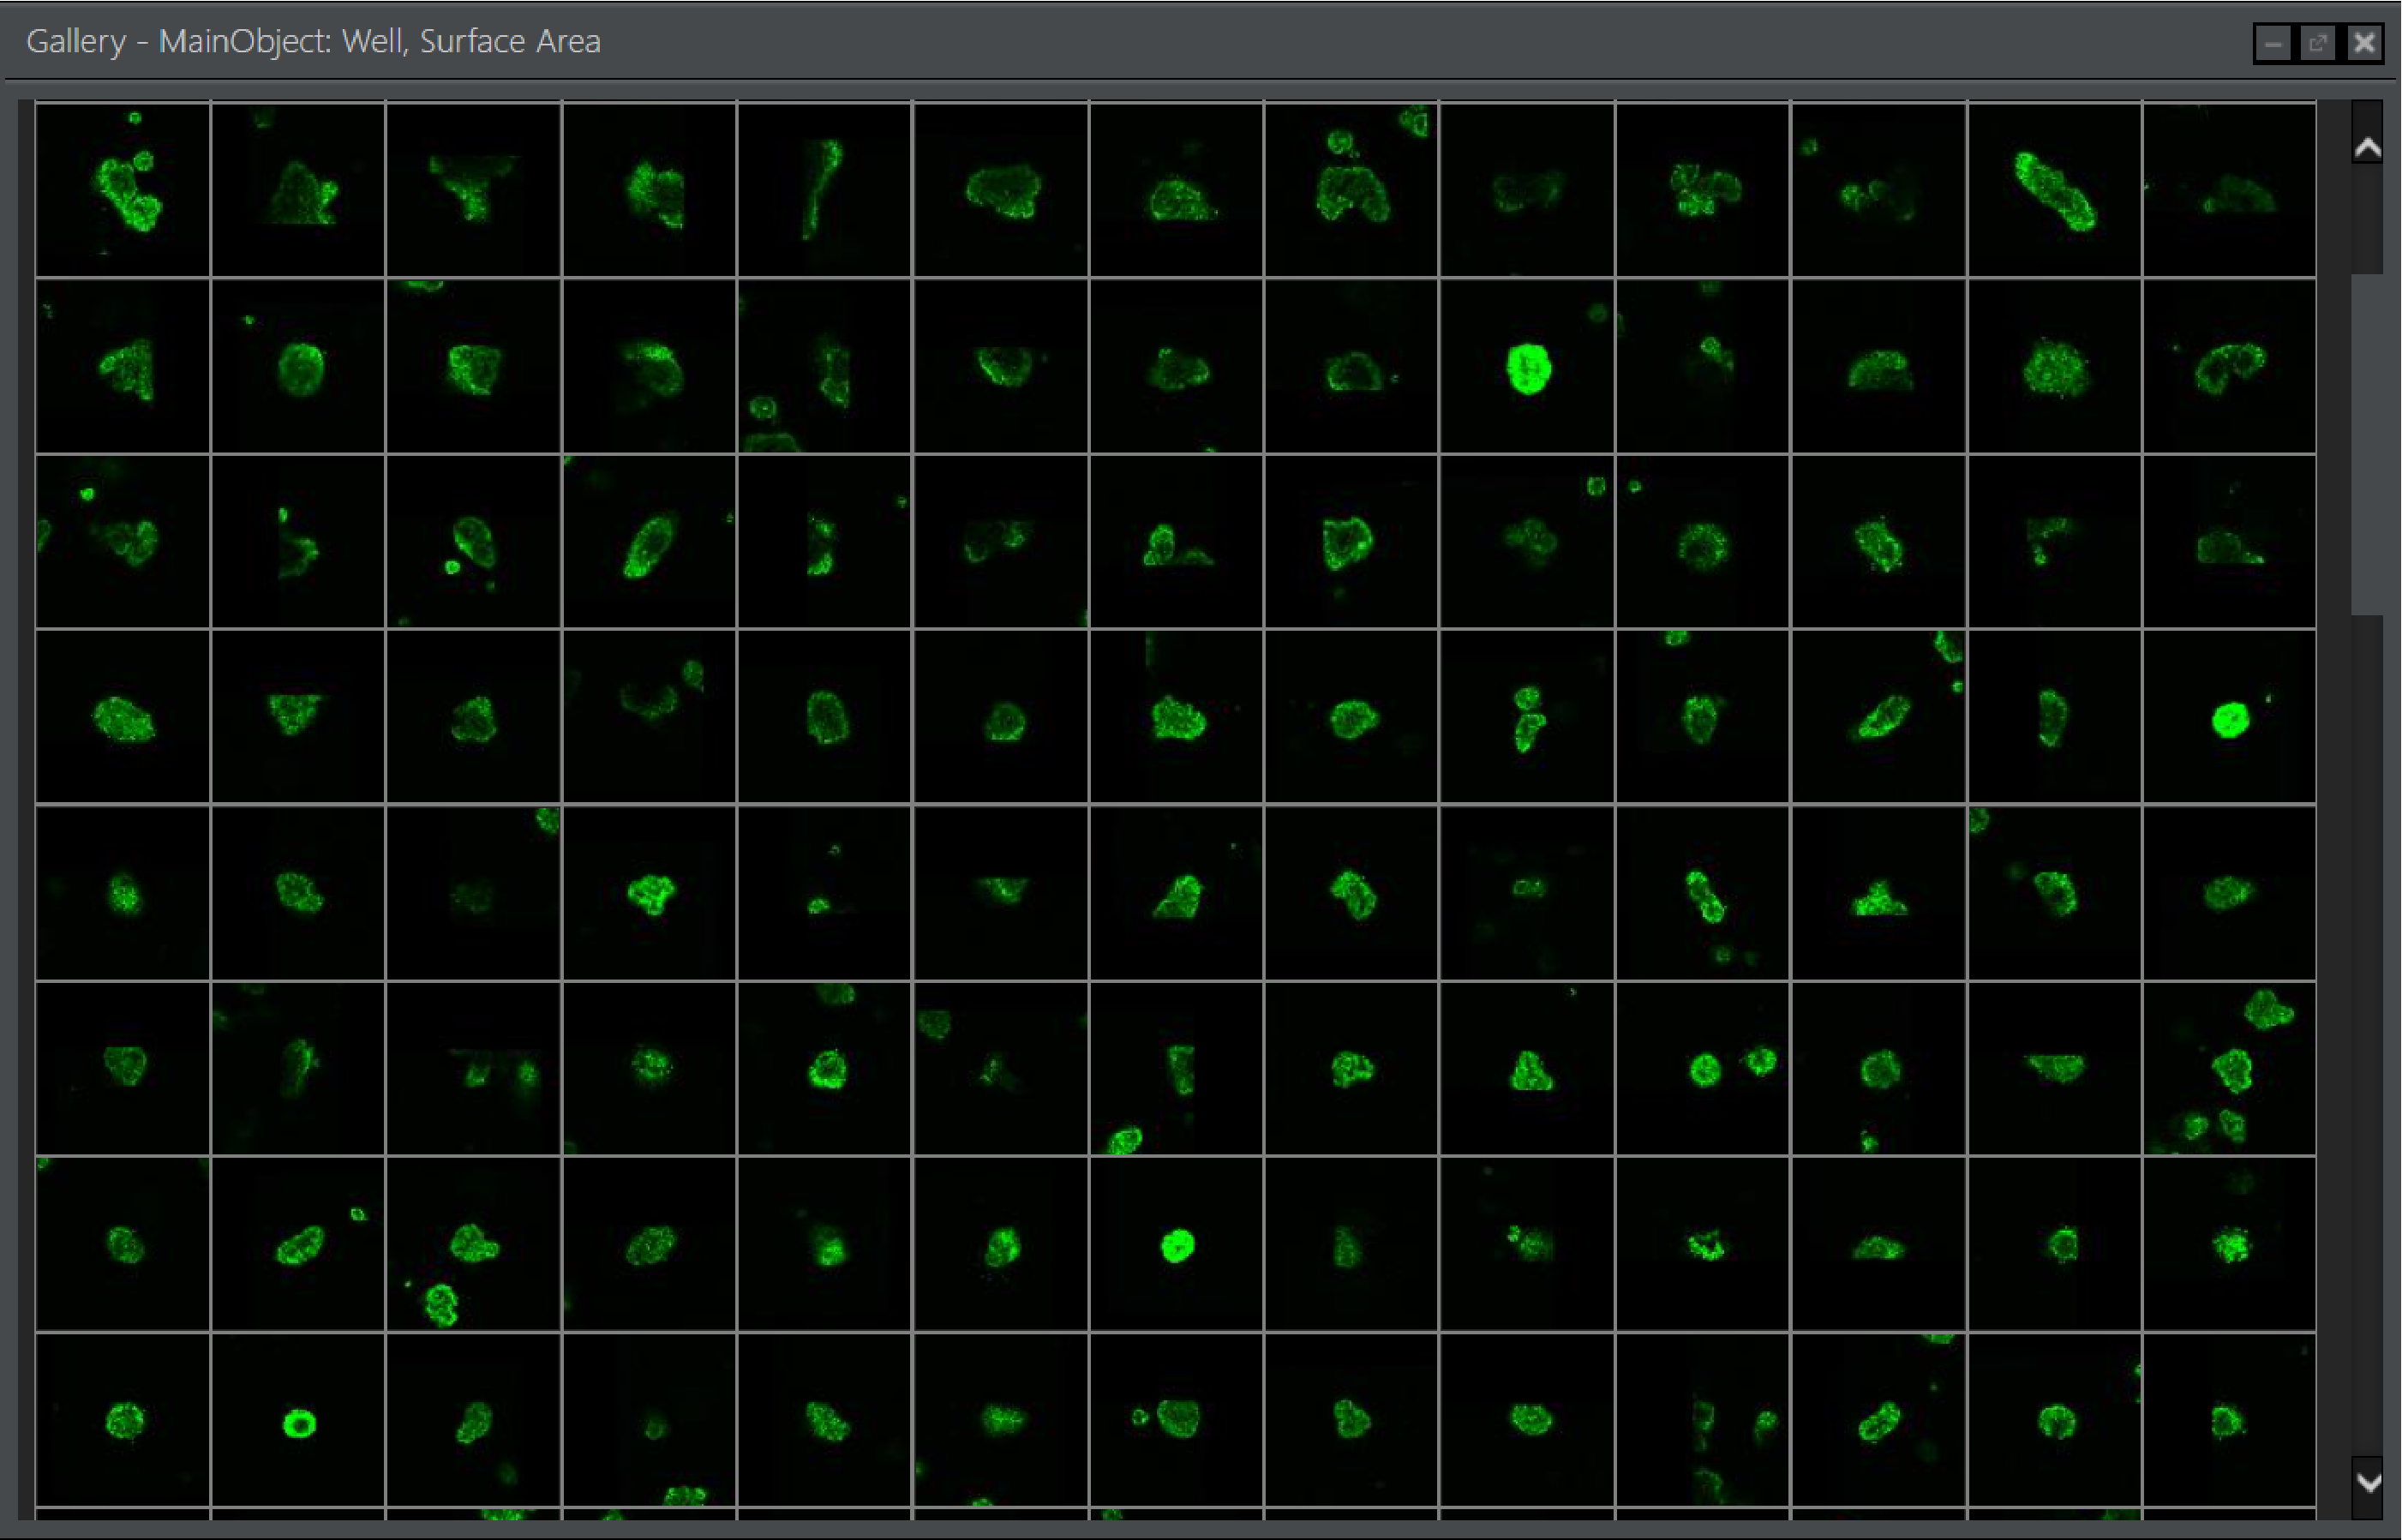 Gallery view showing the gated organoids from the entire plate with GFP